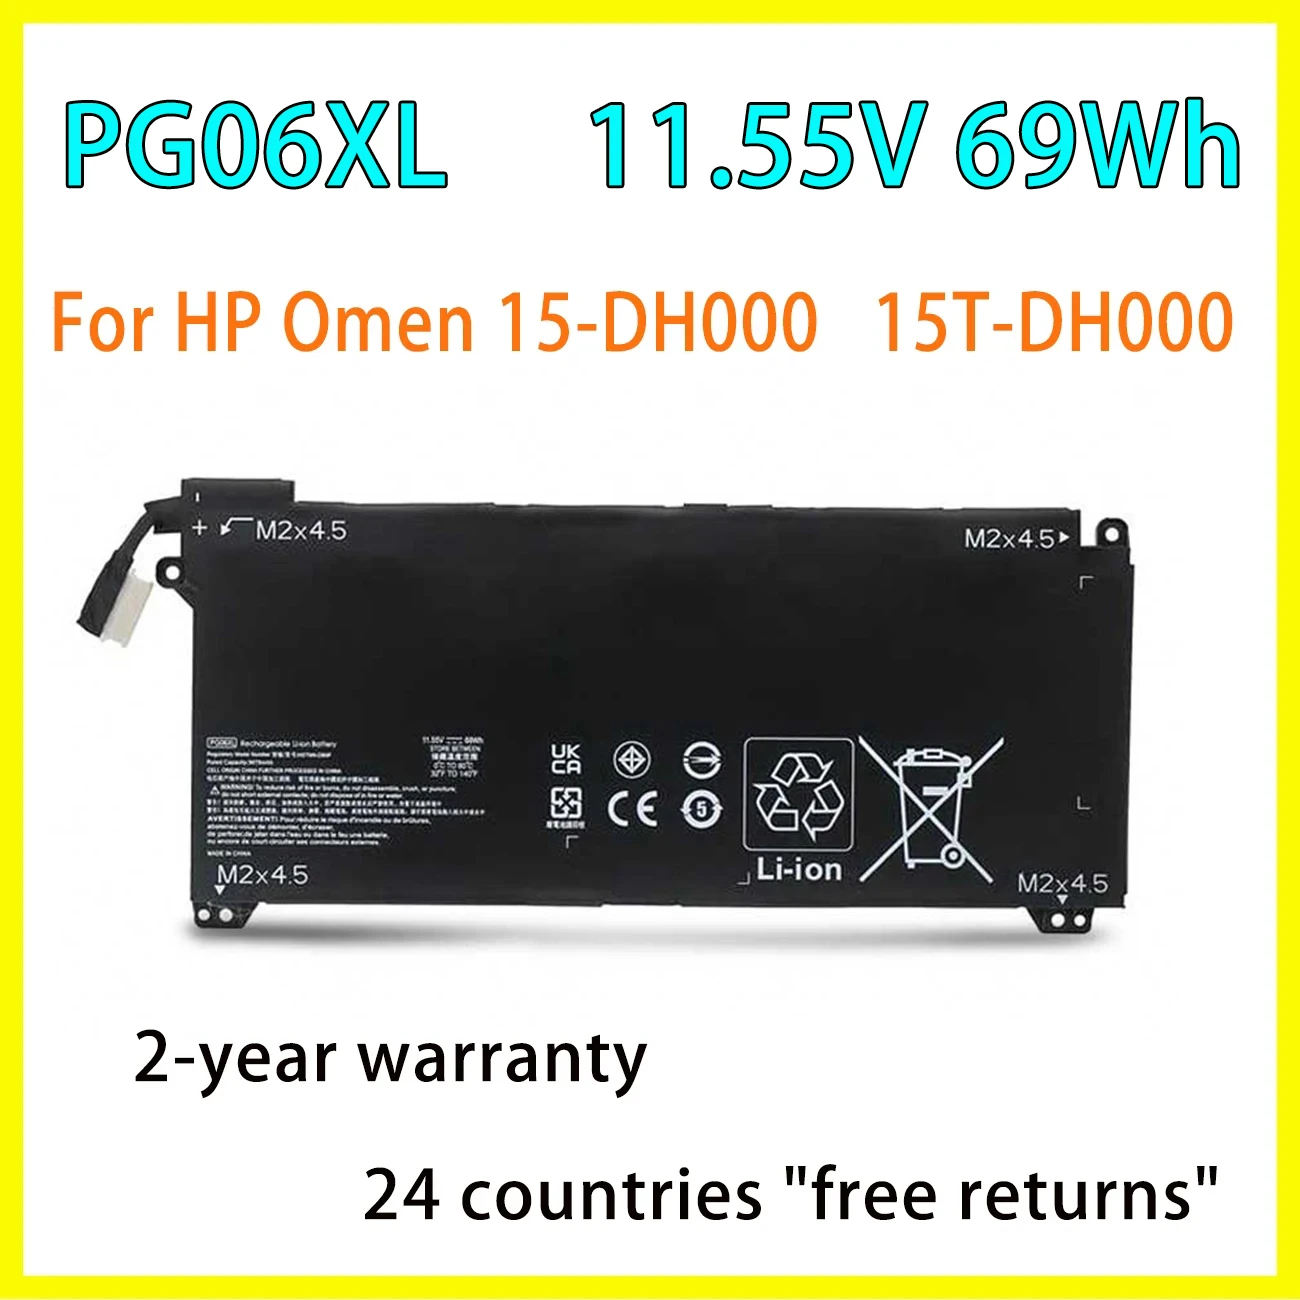 

New PG06XL Laptop Battery For HP Omen 15-DH000 15T-DH000 15-DH1054NR 15-DH1088NR Series 69Wh 11.55V High Quality